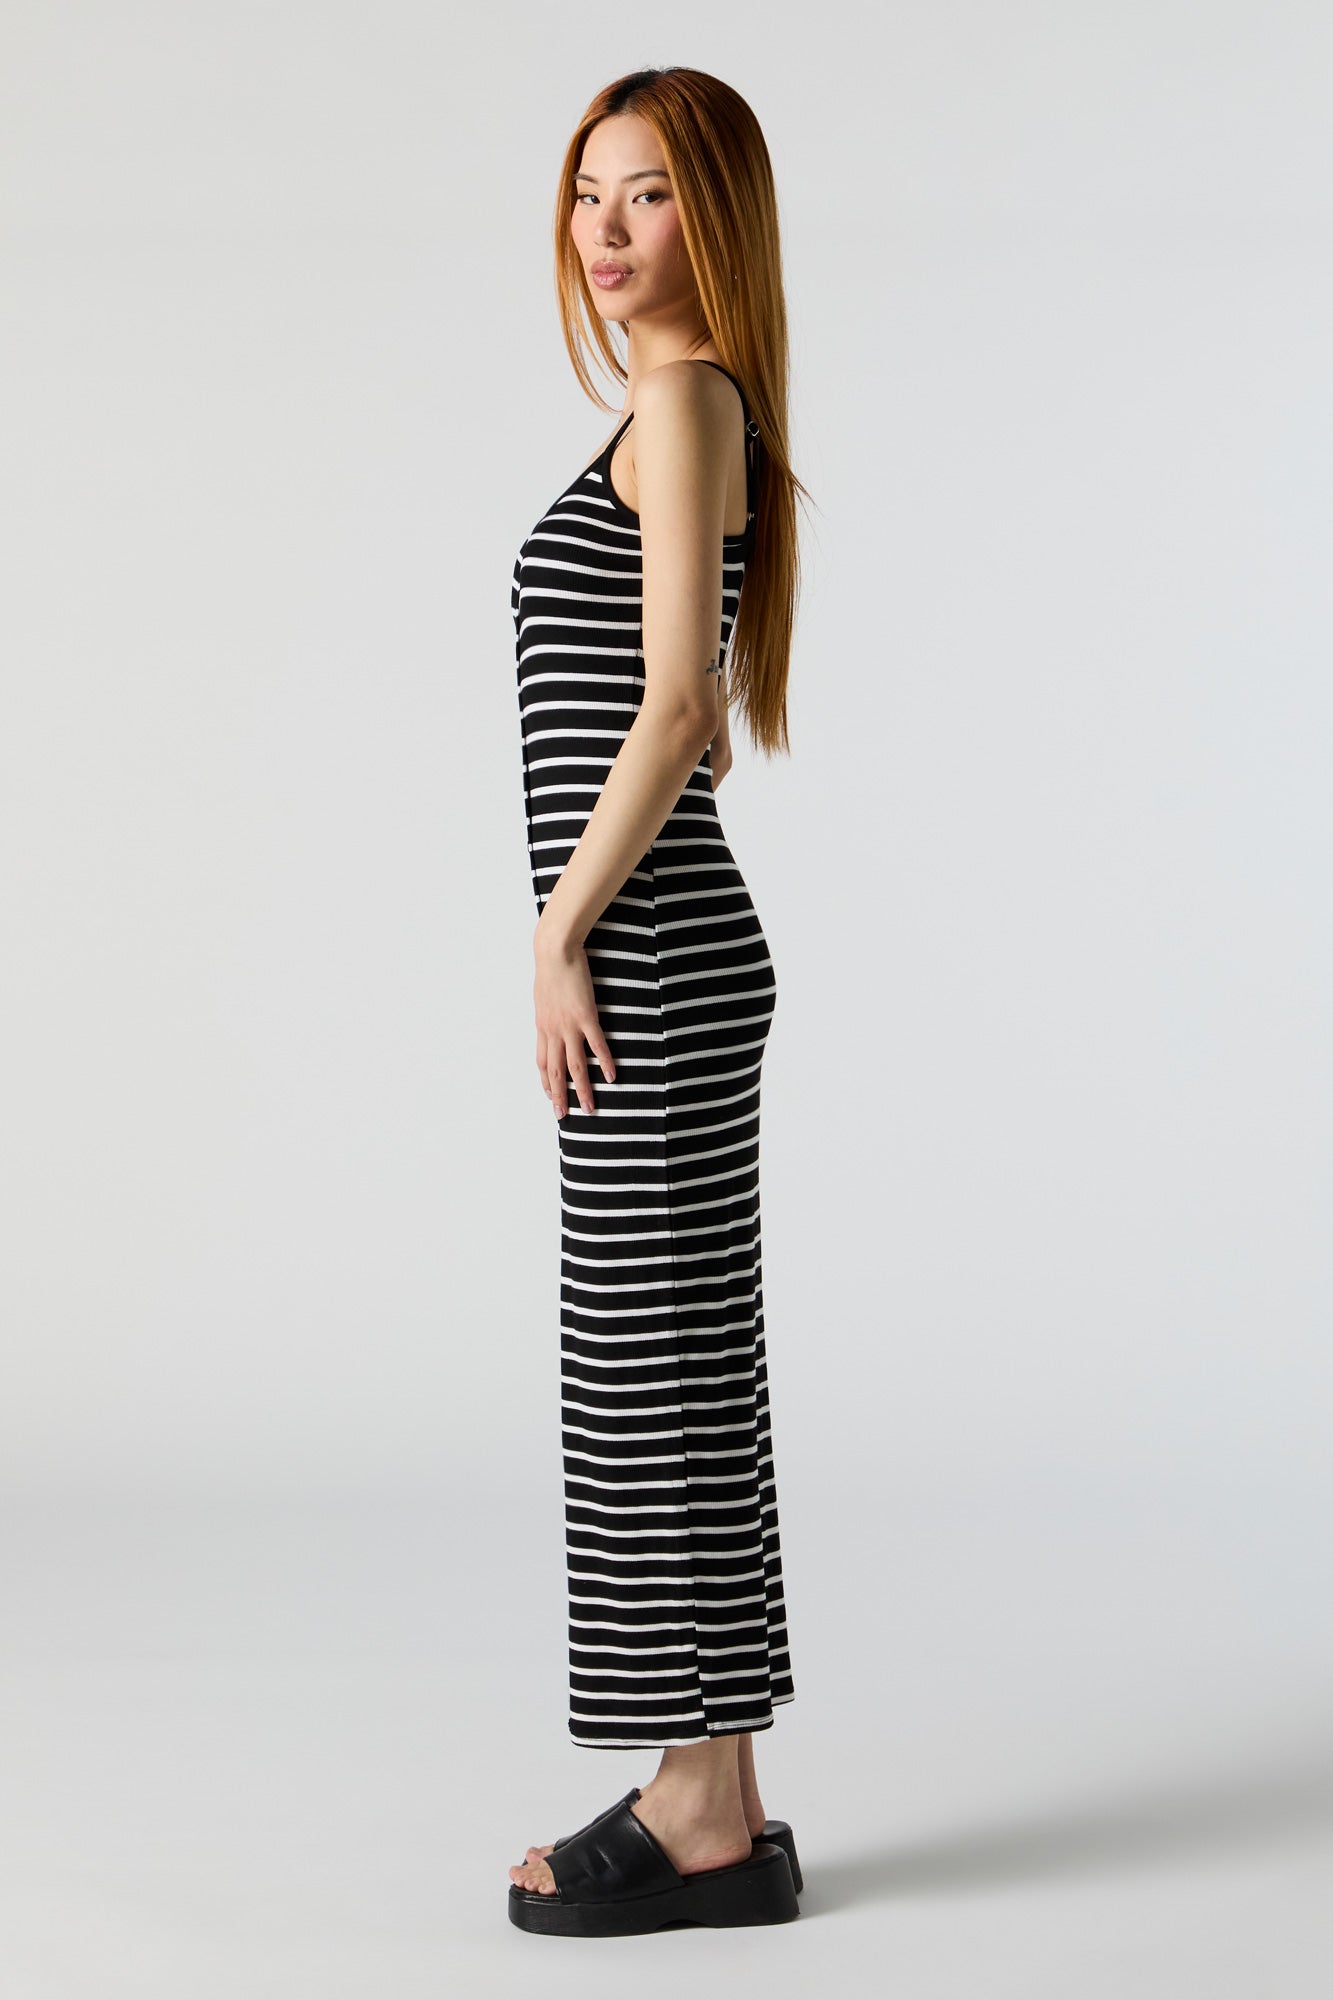 Striped Ribbed Button Front Bodycon Maxi Dress